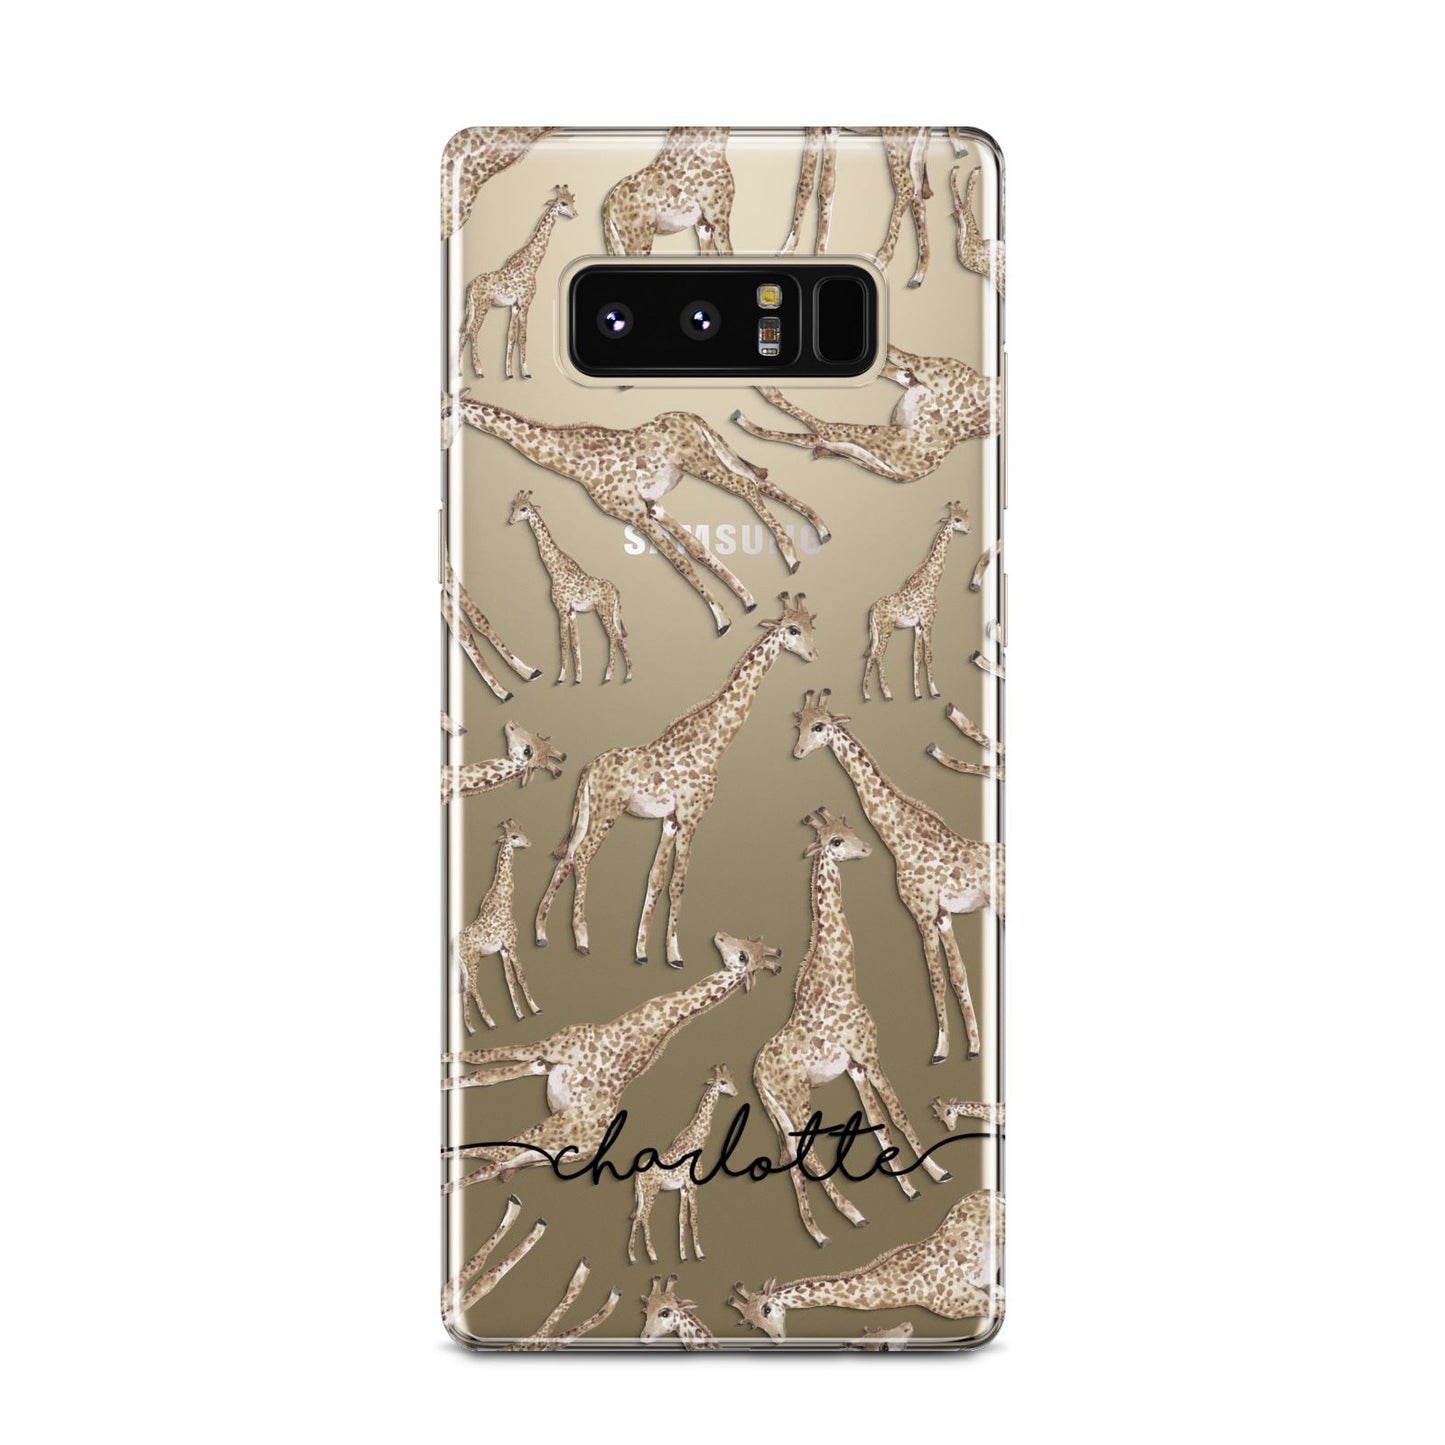 Personalised Giraffes with Name Samsung Galaxy Note 8 Case